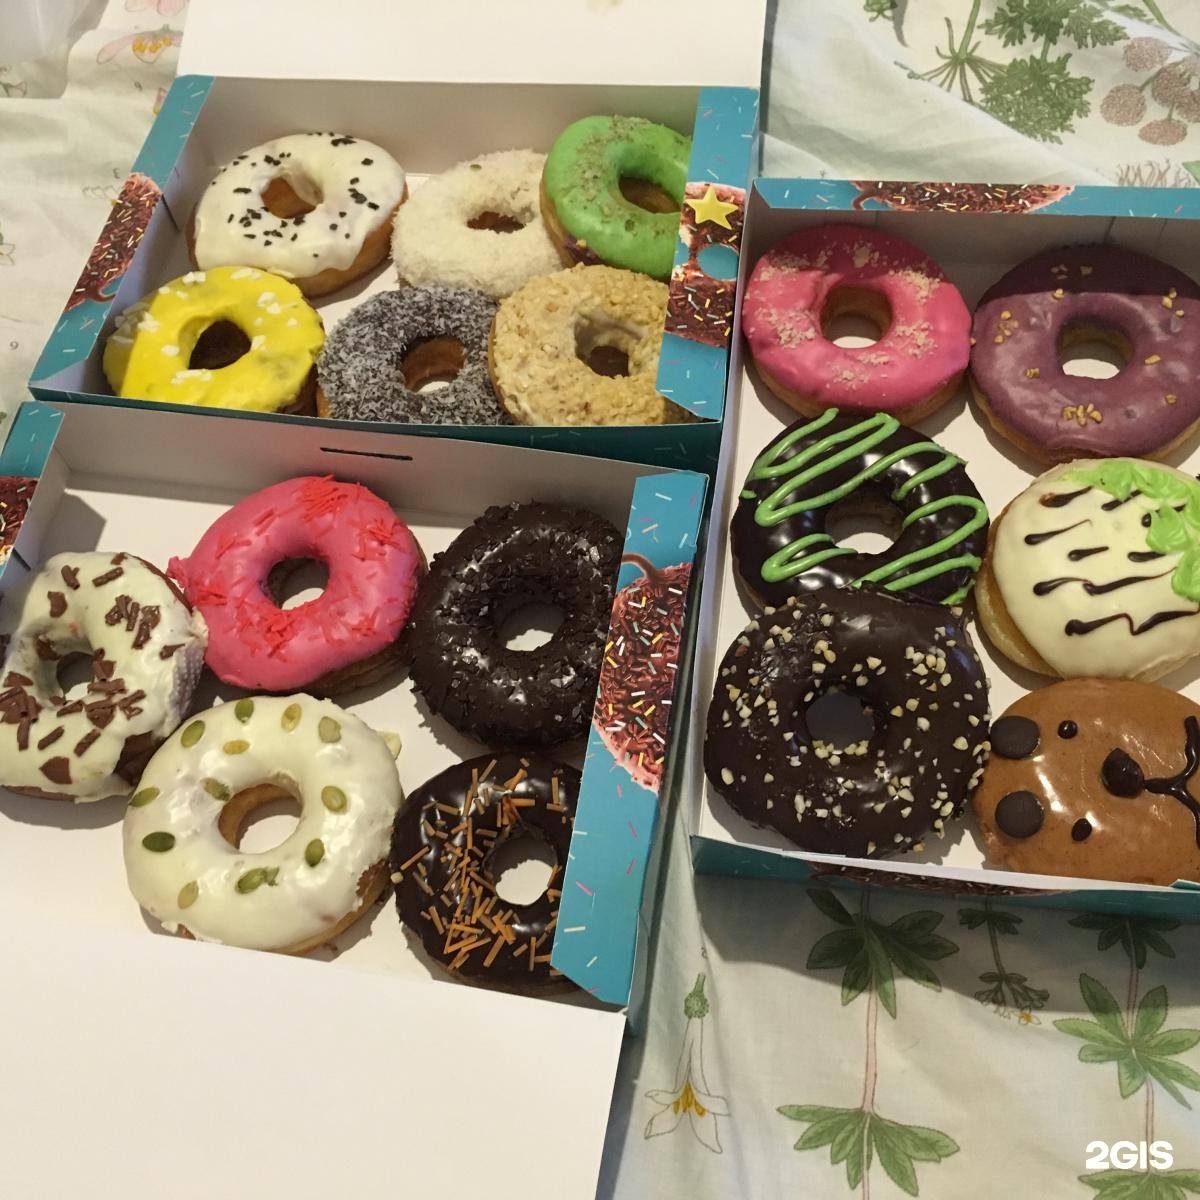 Star donuts. Донатс кафе. Донатс кафе Екатеринбург. Star Donuts Екатеринбург Гринвич. ООО Донатс кафе Москва.